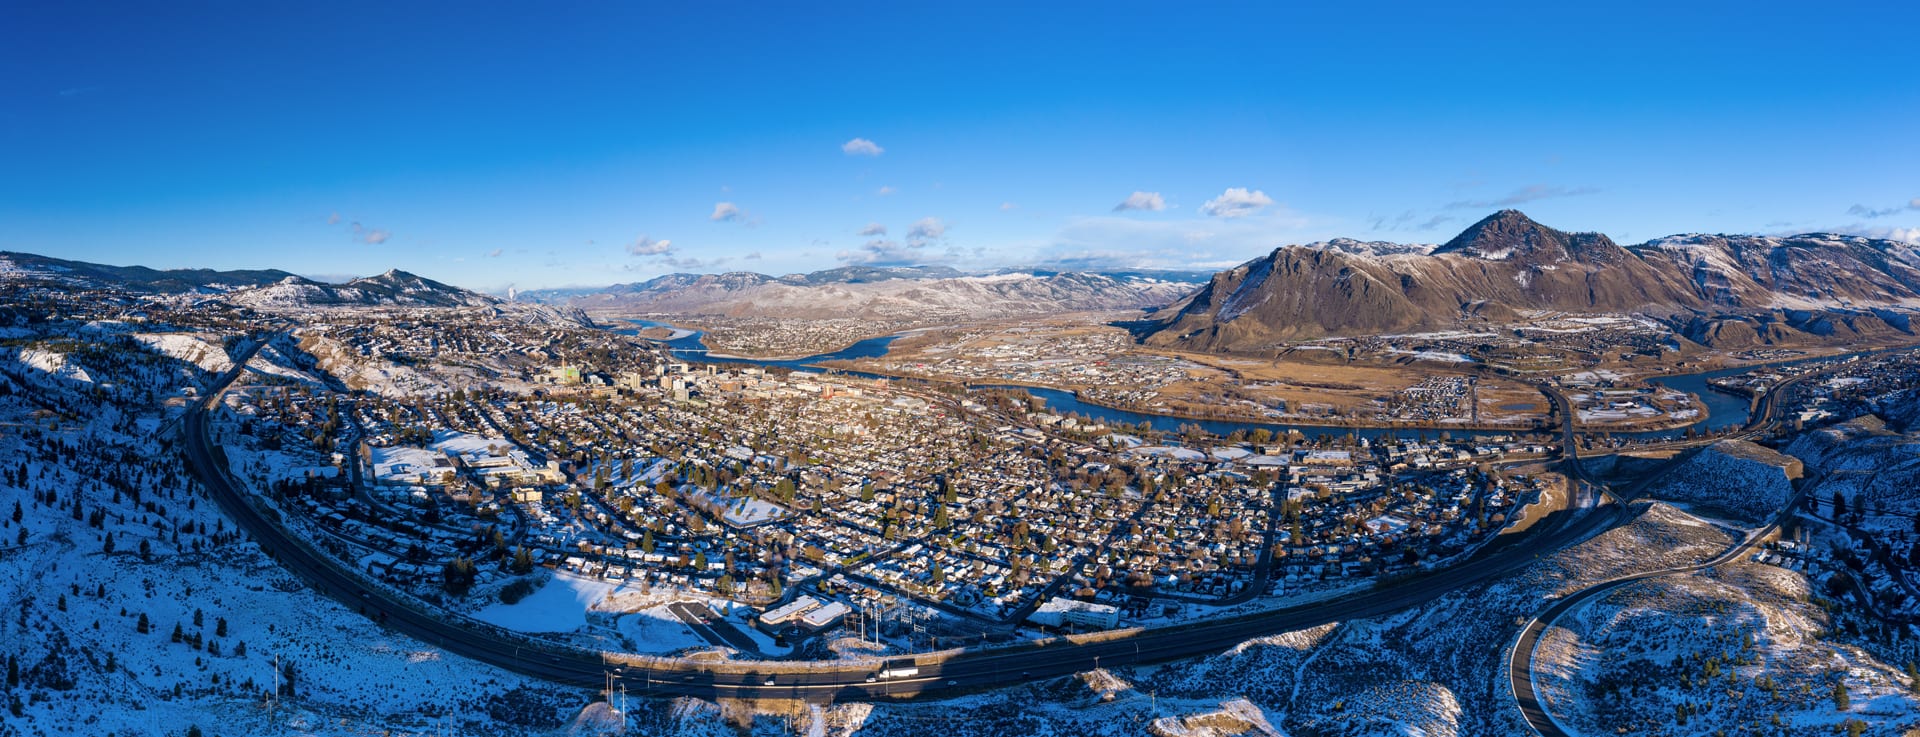 Kamloops City Aerial faraway mountain with curved road and cityscape